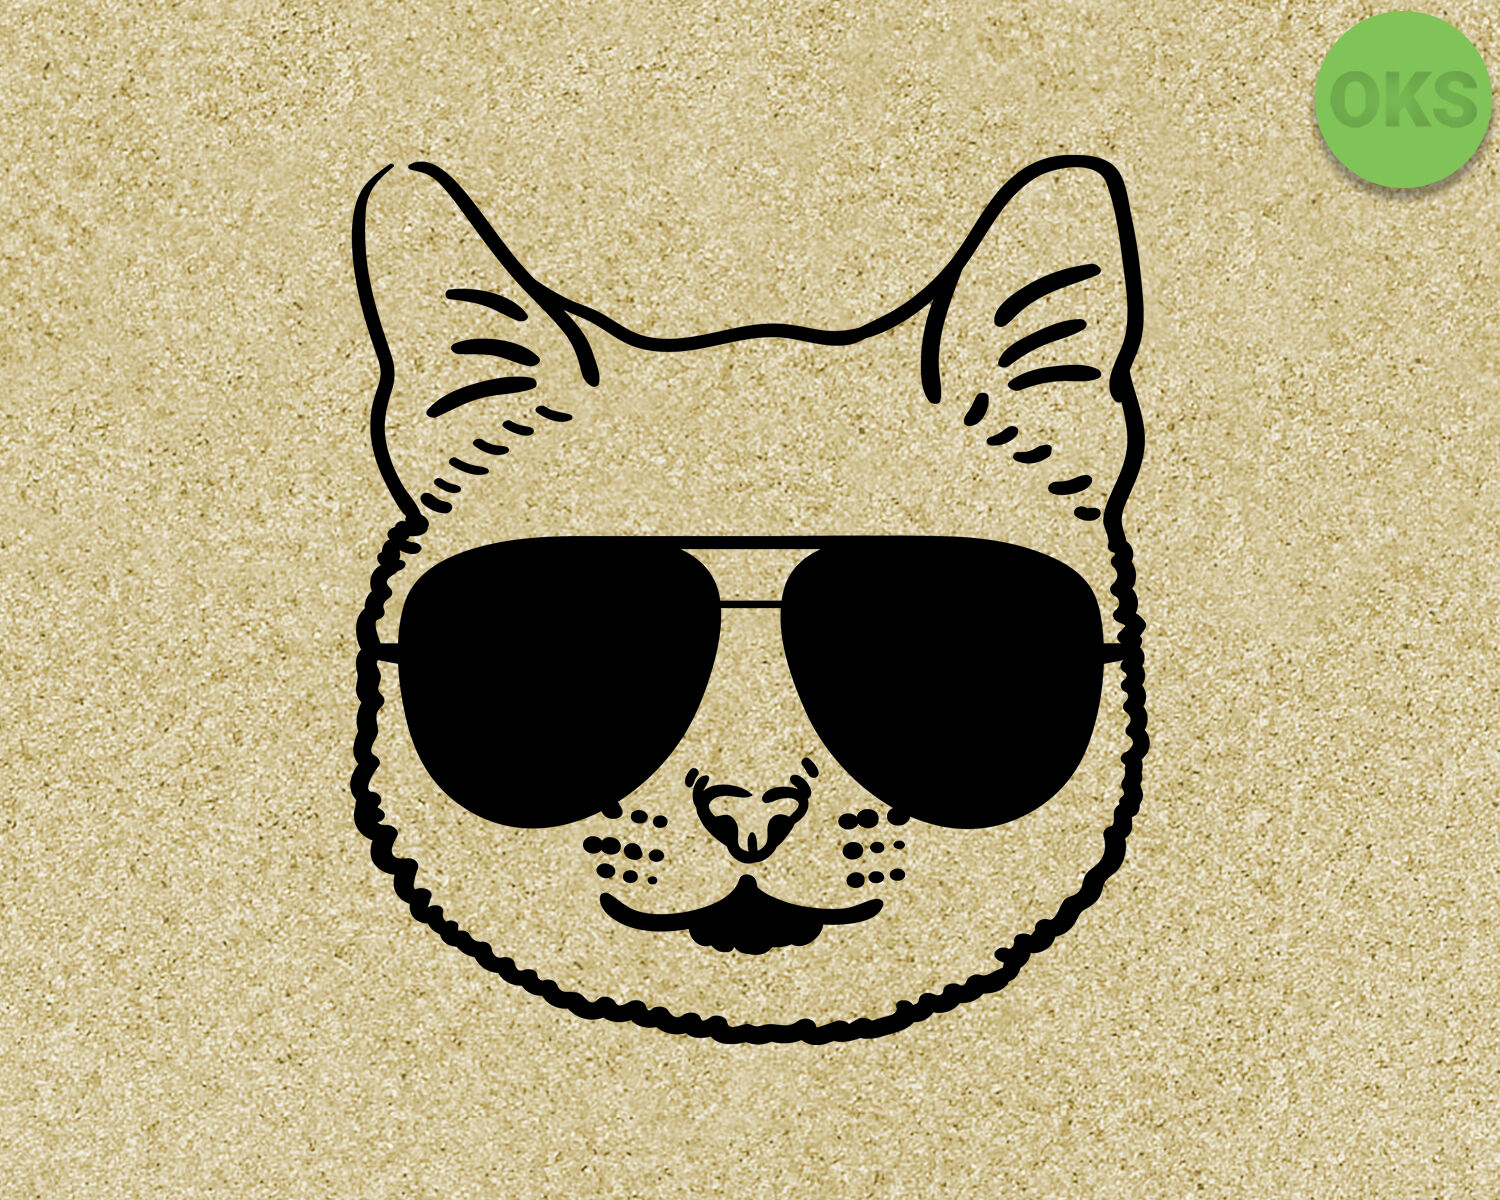 cat with sunglasses svg, dxf, vector, eps, clipart, cricut, download By